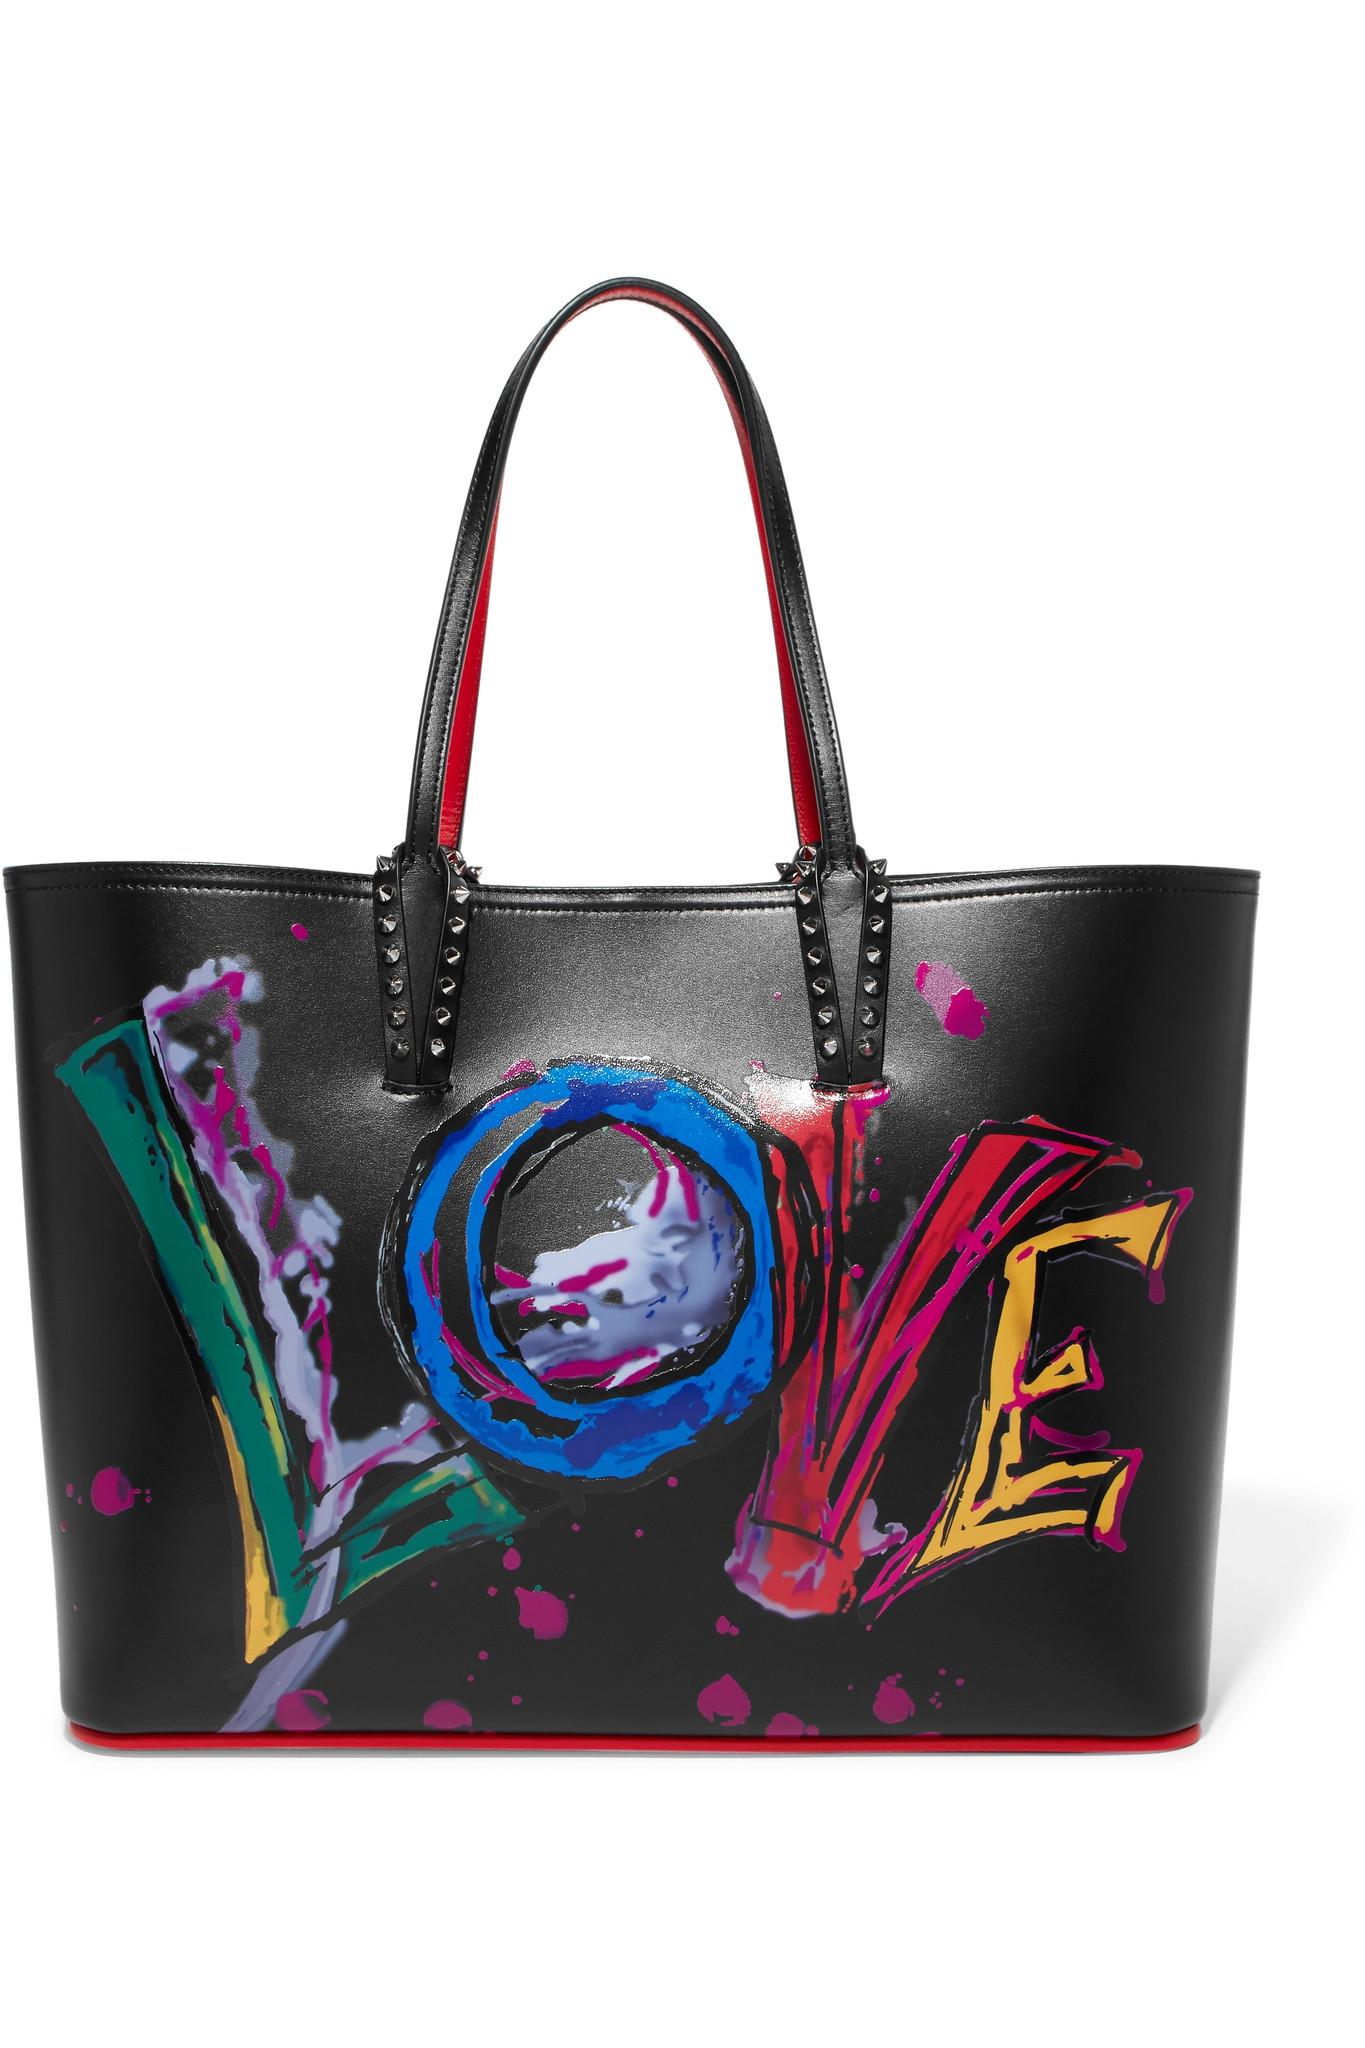 Christian Louboutin Cabata Spiked Printed Leather Tote in Black - Save ...